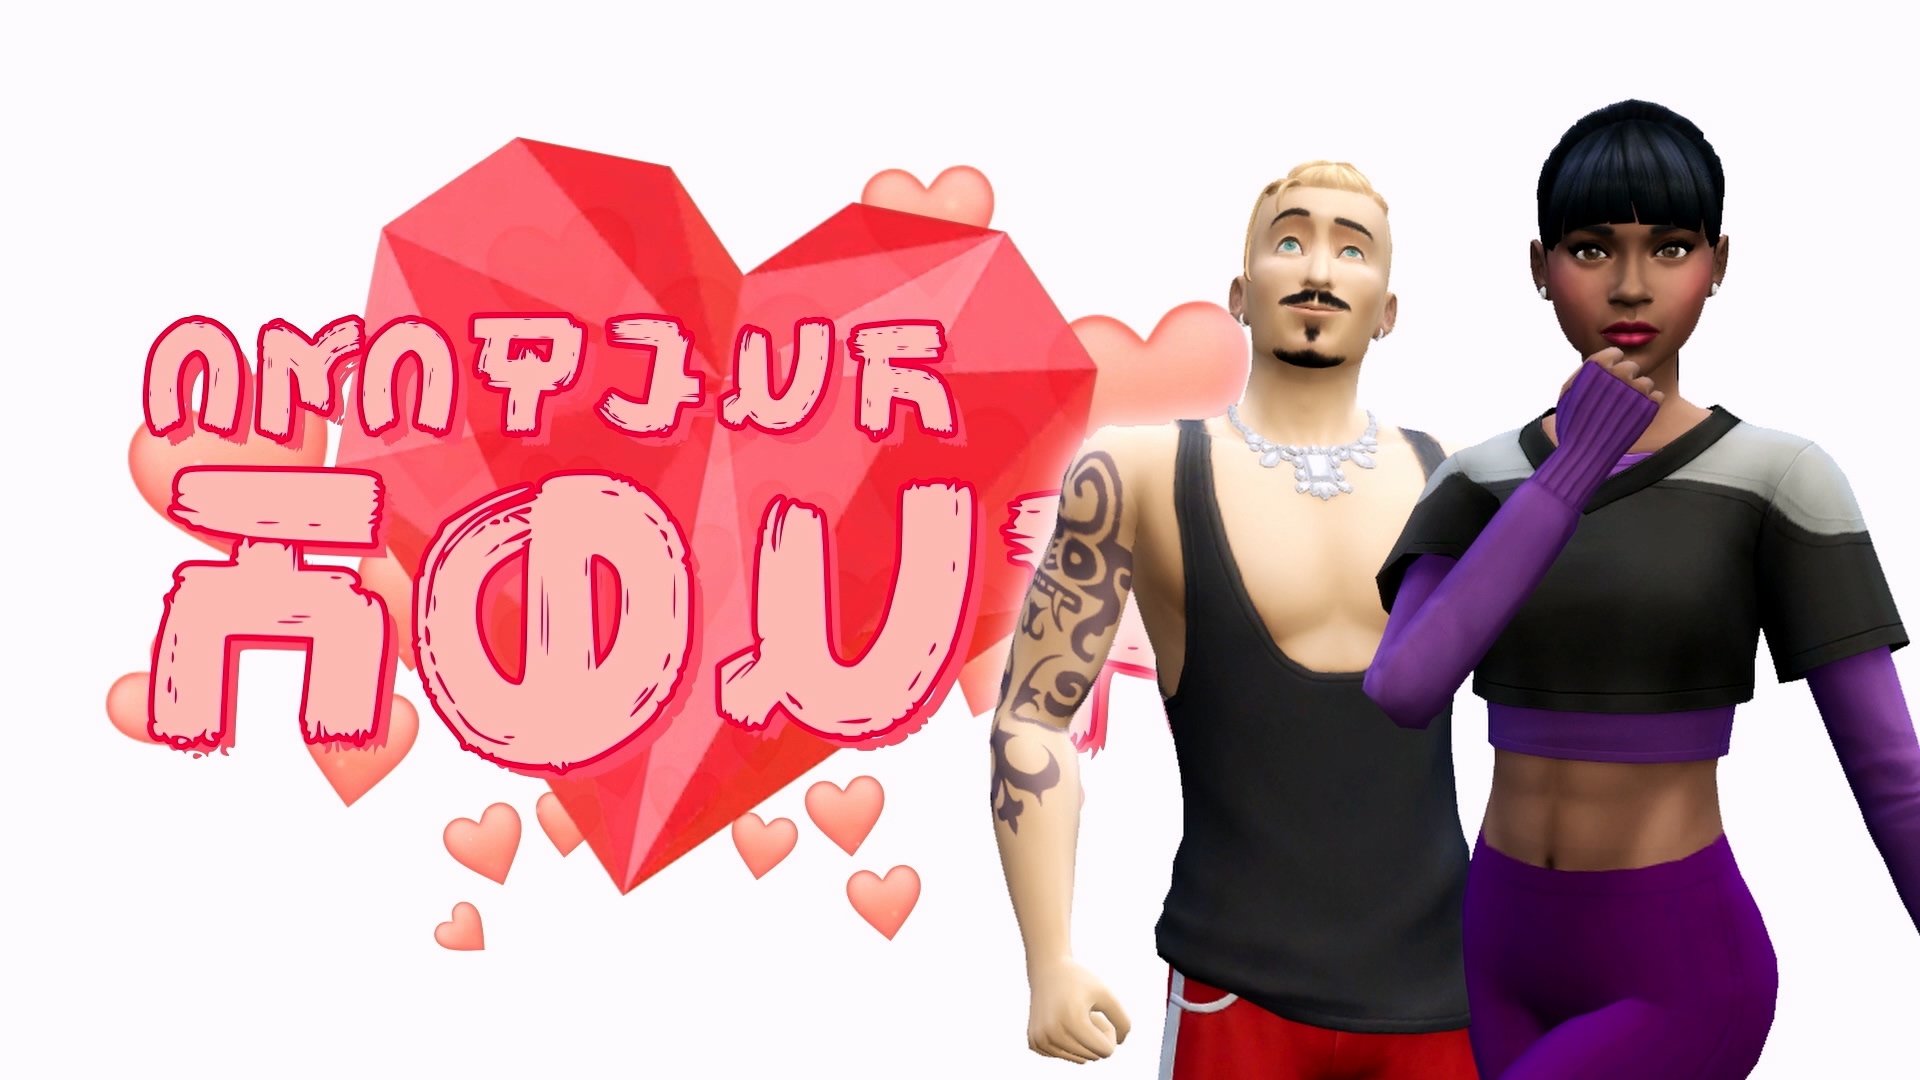 Amateur Hour presents: Thorne Bailey & Octavia Moon from Del Sol Valley